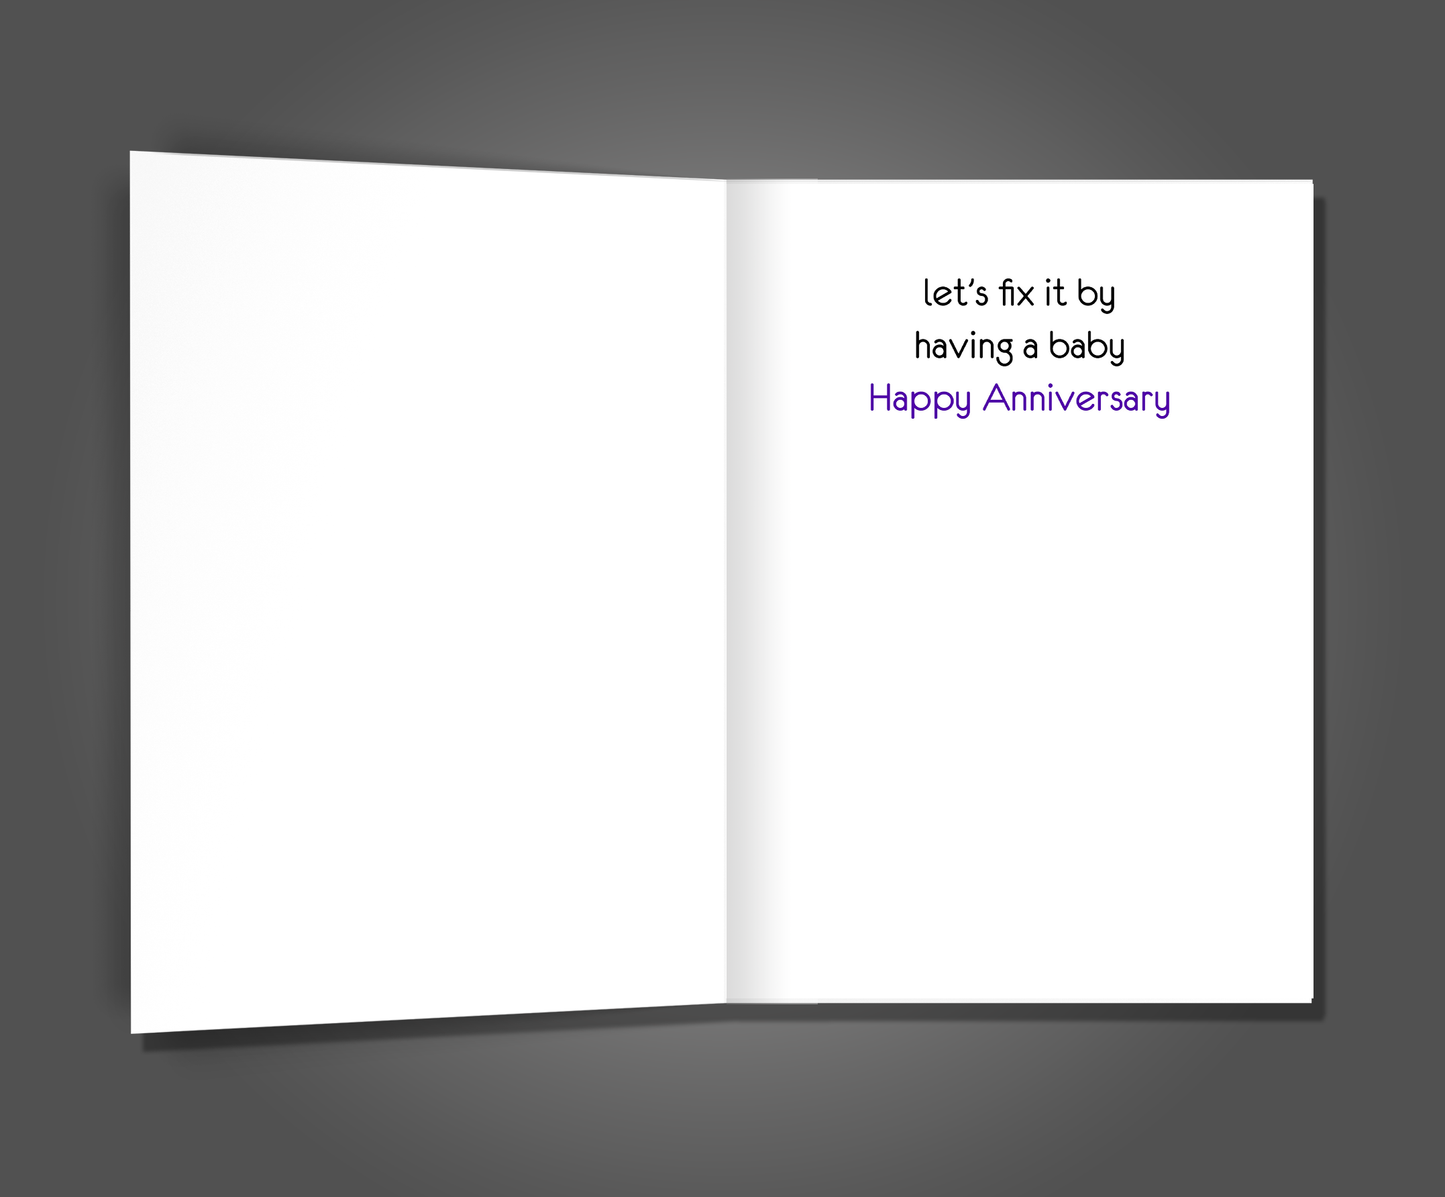 Let's Have a Baby, Anniversary Card